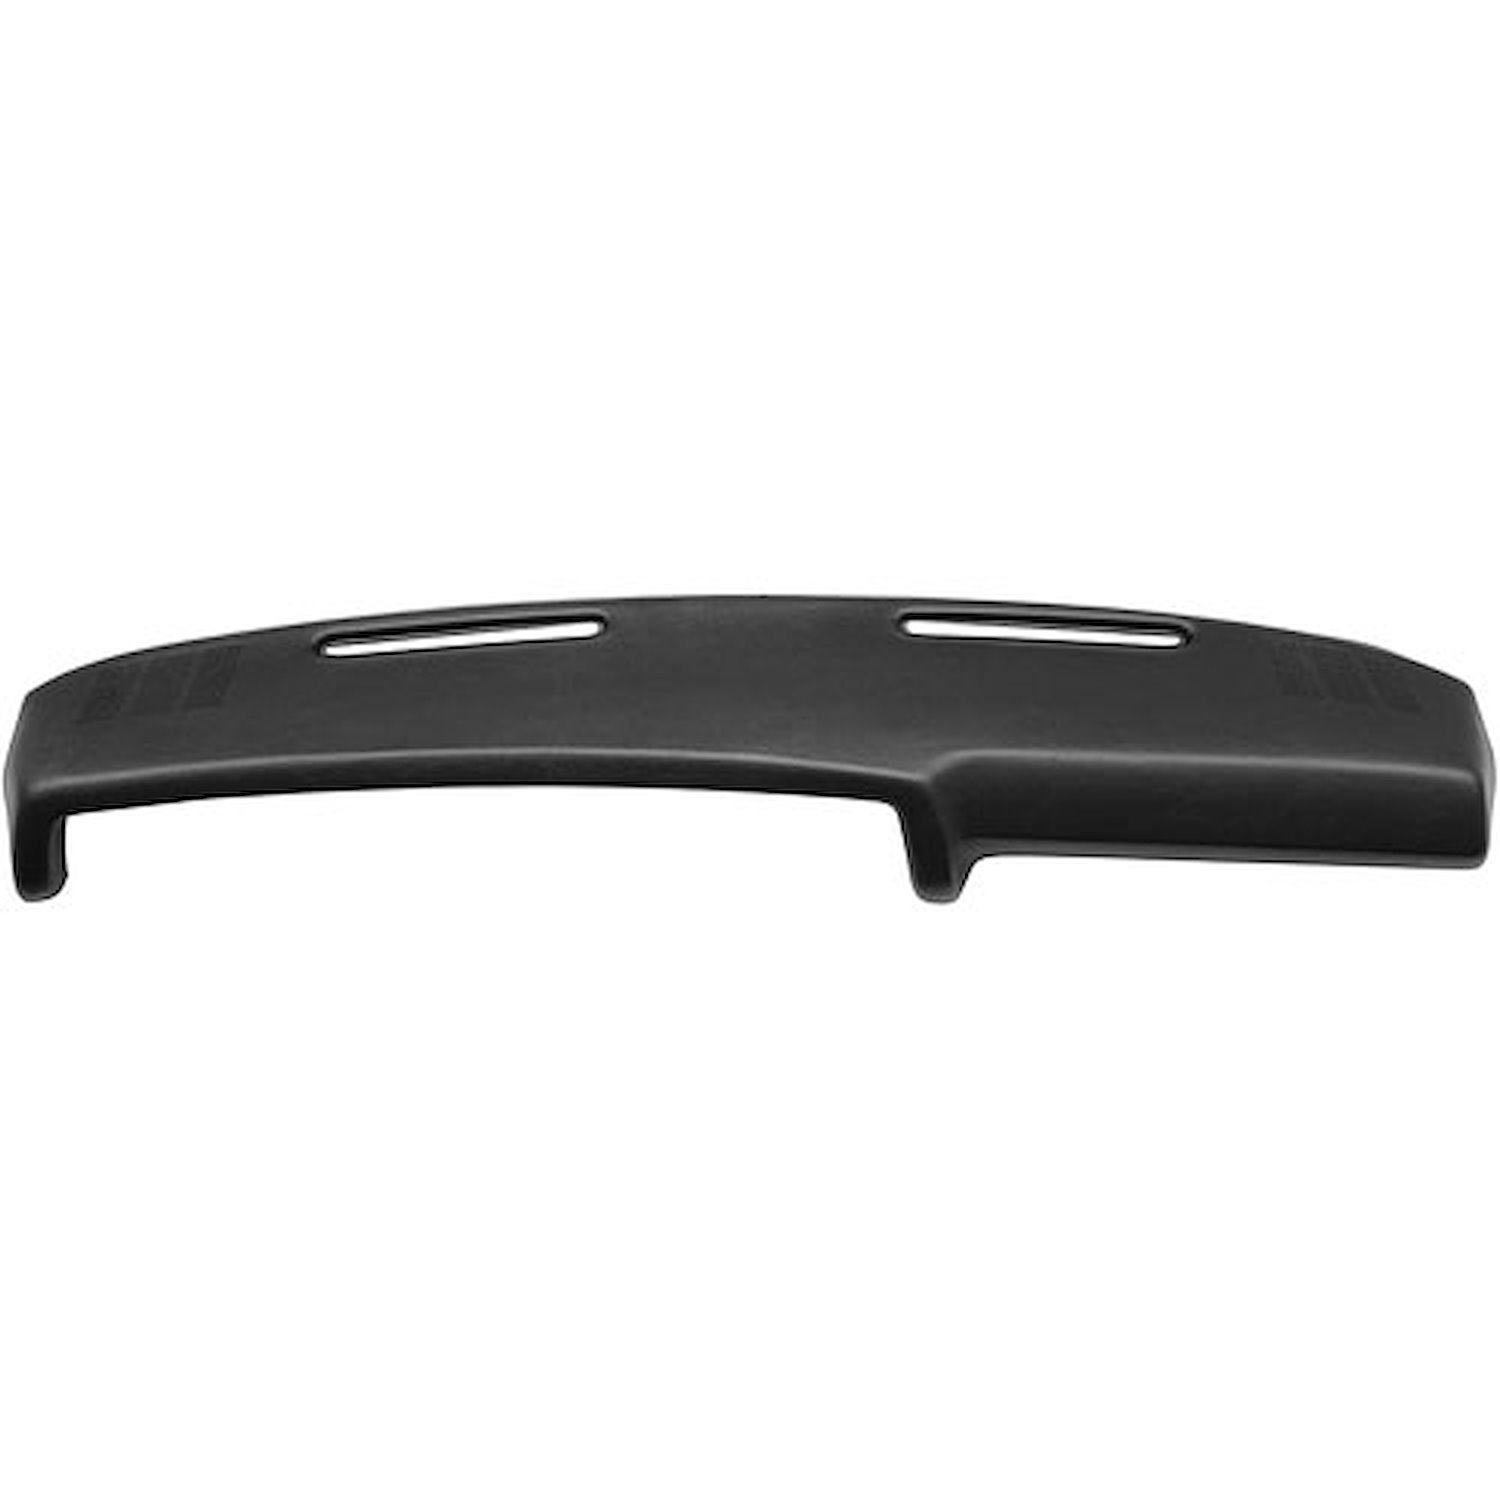 Injection-Molded Urethane Foam Dash Pad 1970-72 Chevy Chevelle/El Camino/Monte Carlo - With Stereo